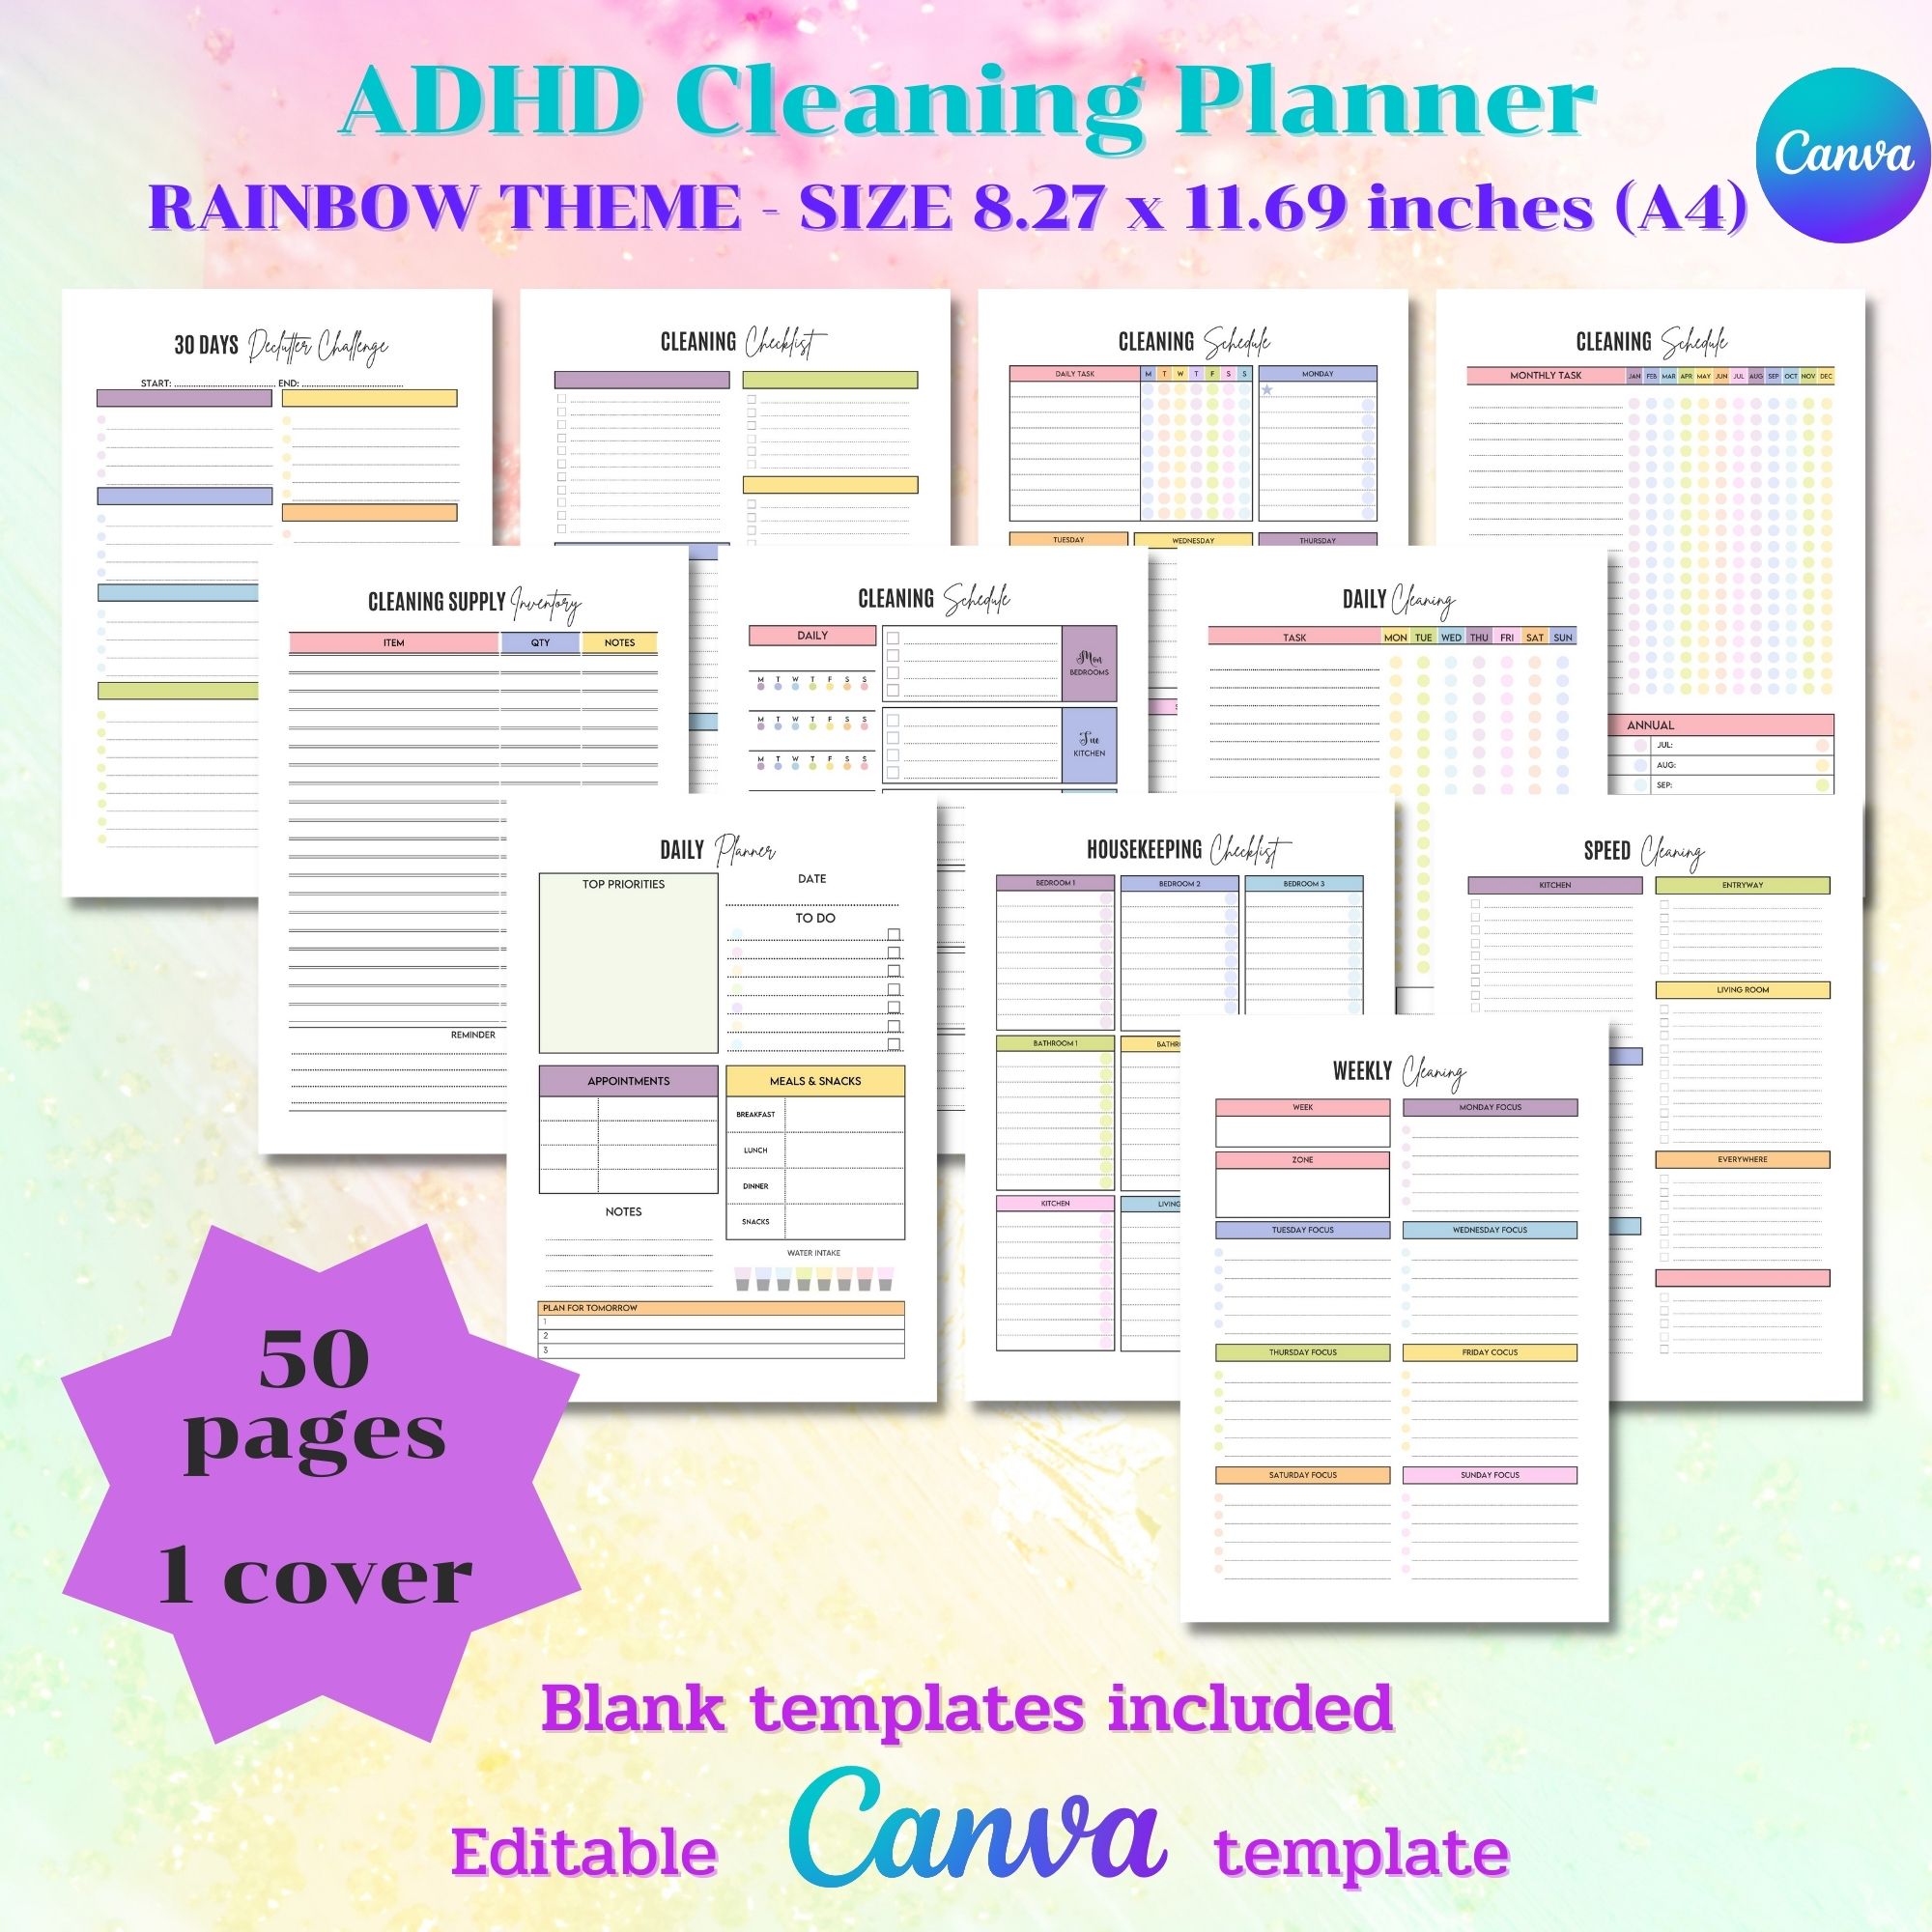 Ultimate ADHD cleaning planner bundle - editable by canva preview image.